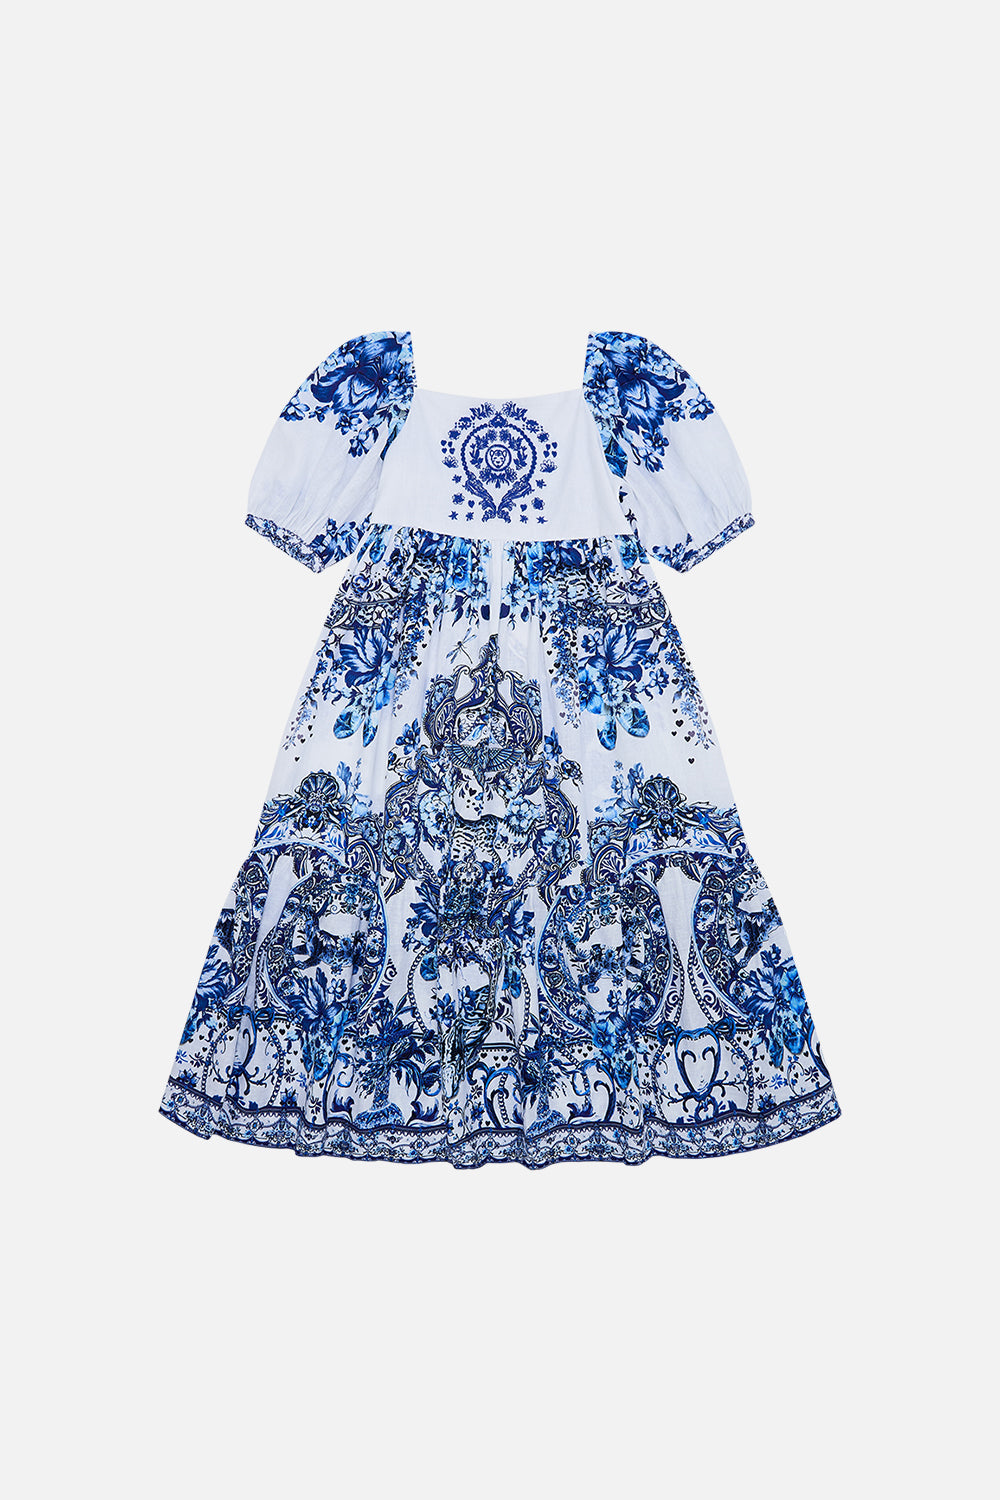 Front product view of Milla By CAMILLA kids mini dress in Glaze and Graze print